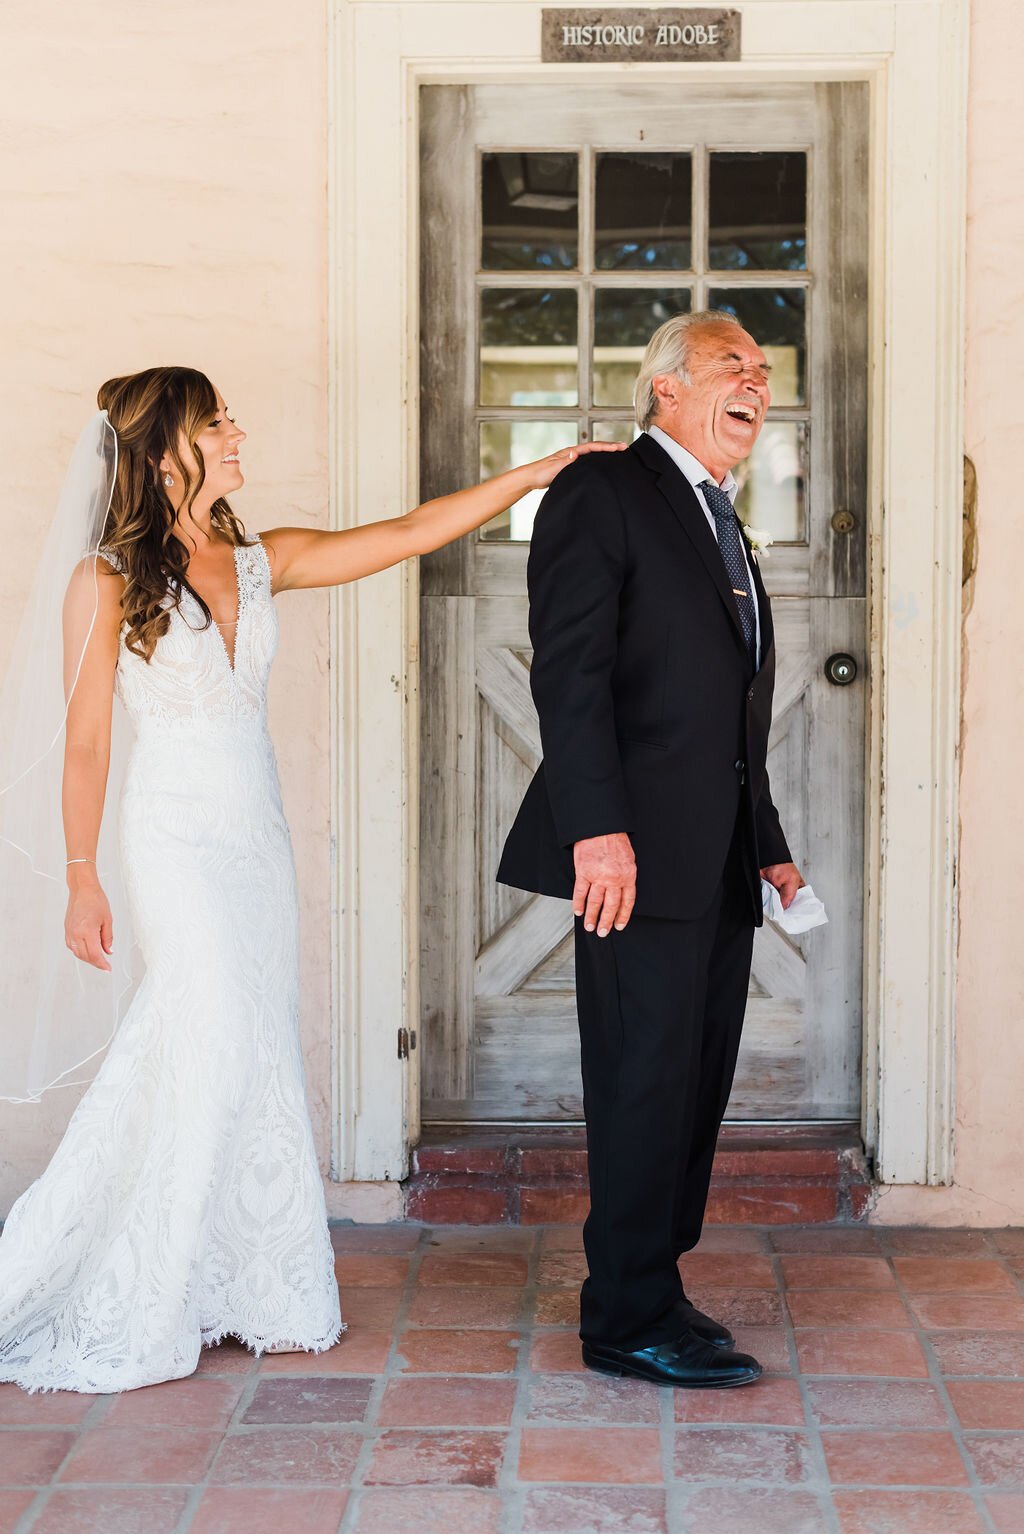 www.santabarbarawedding.com | SB Historical Museum | Donna Romani | Julie Shuford Photography | Beauty by Cherise | Krysta Withrow | Bride’s First Look with Father